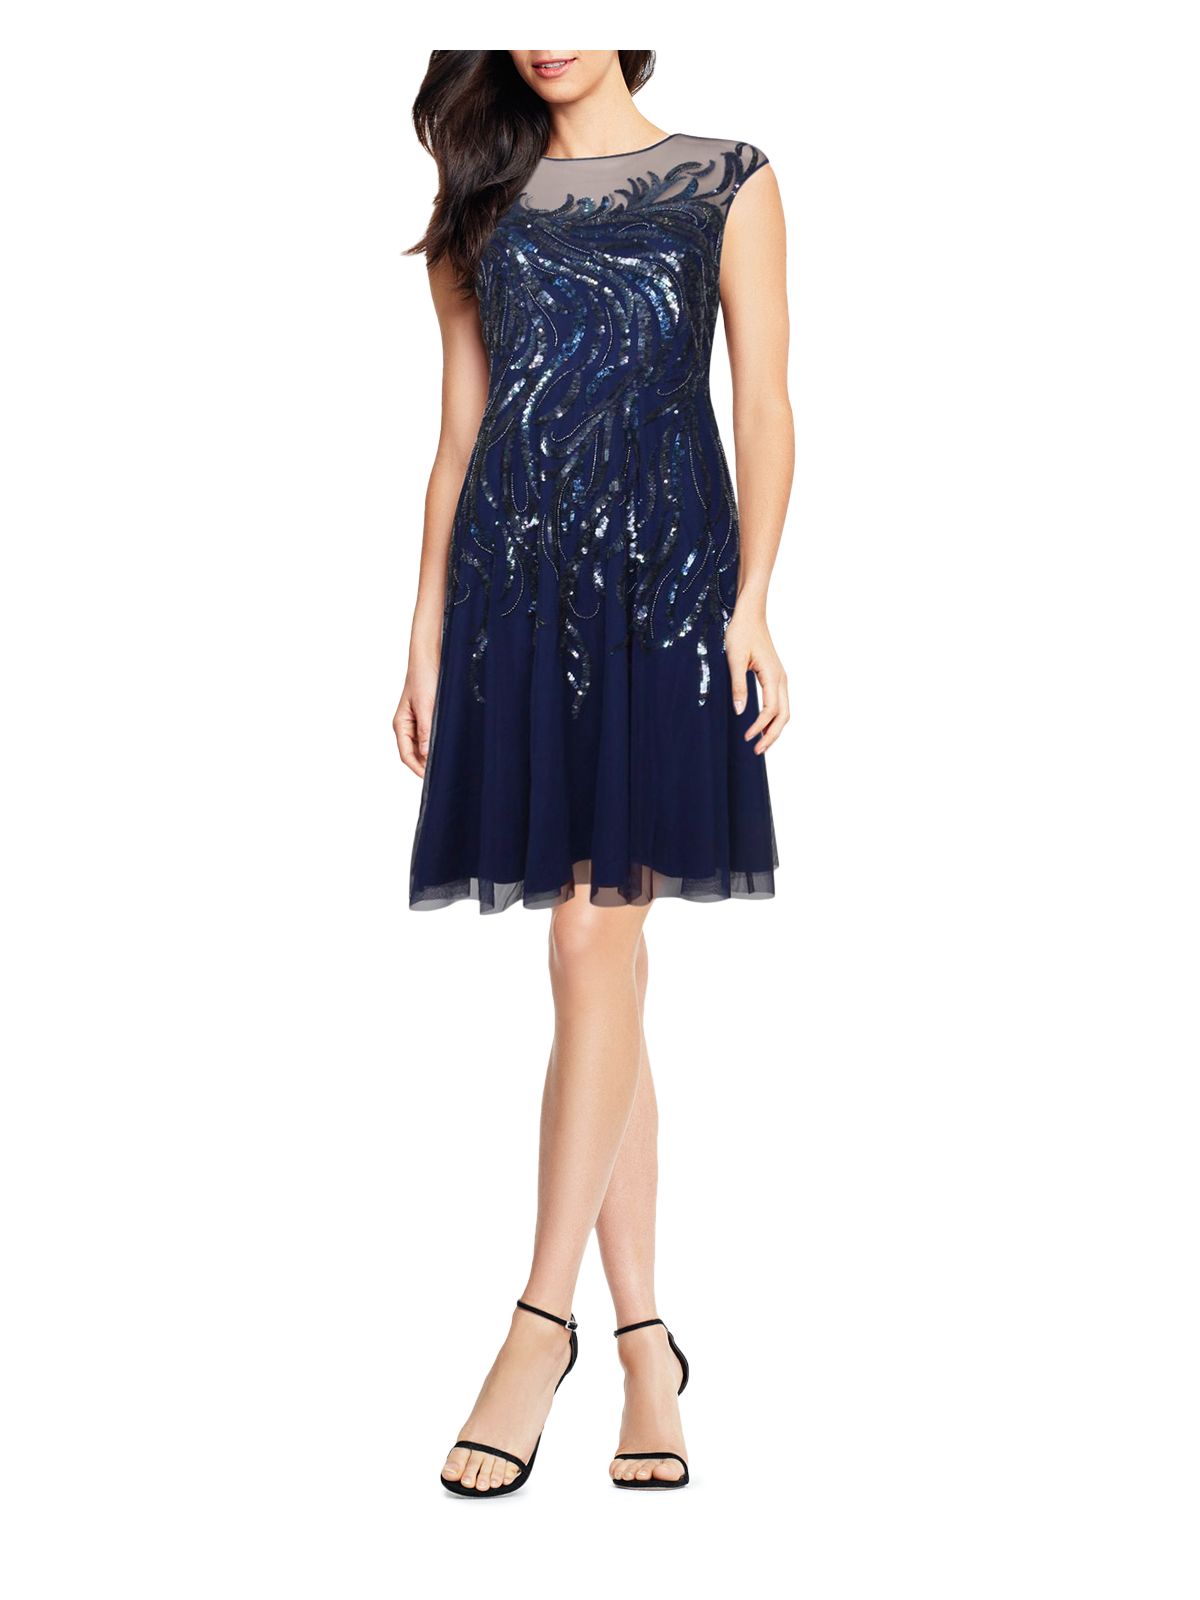 AIDAN MATTOX Womens Navy Embellished Beaded Sleeveless Illusion Neckline Above The Knee Cocktail A-Line Dress 4